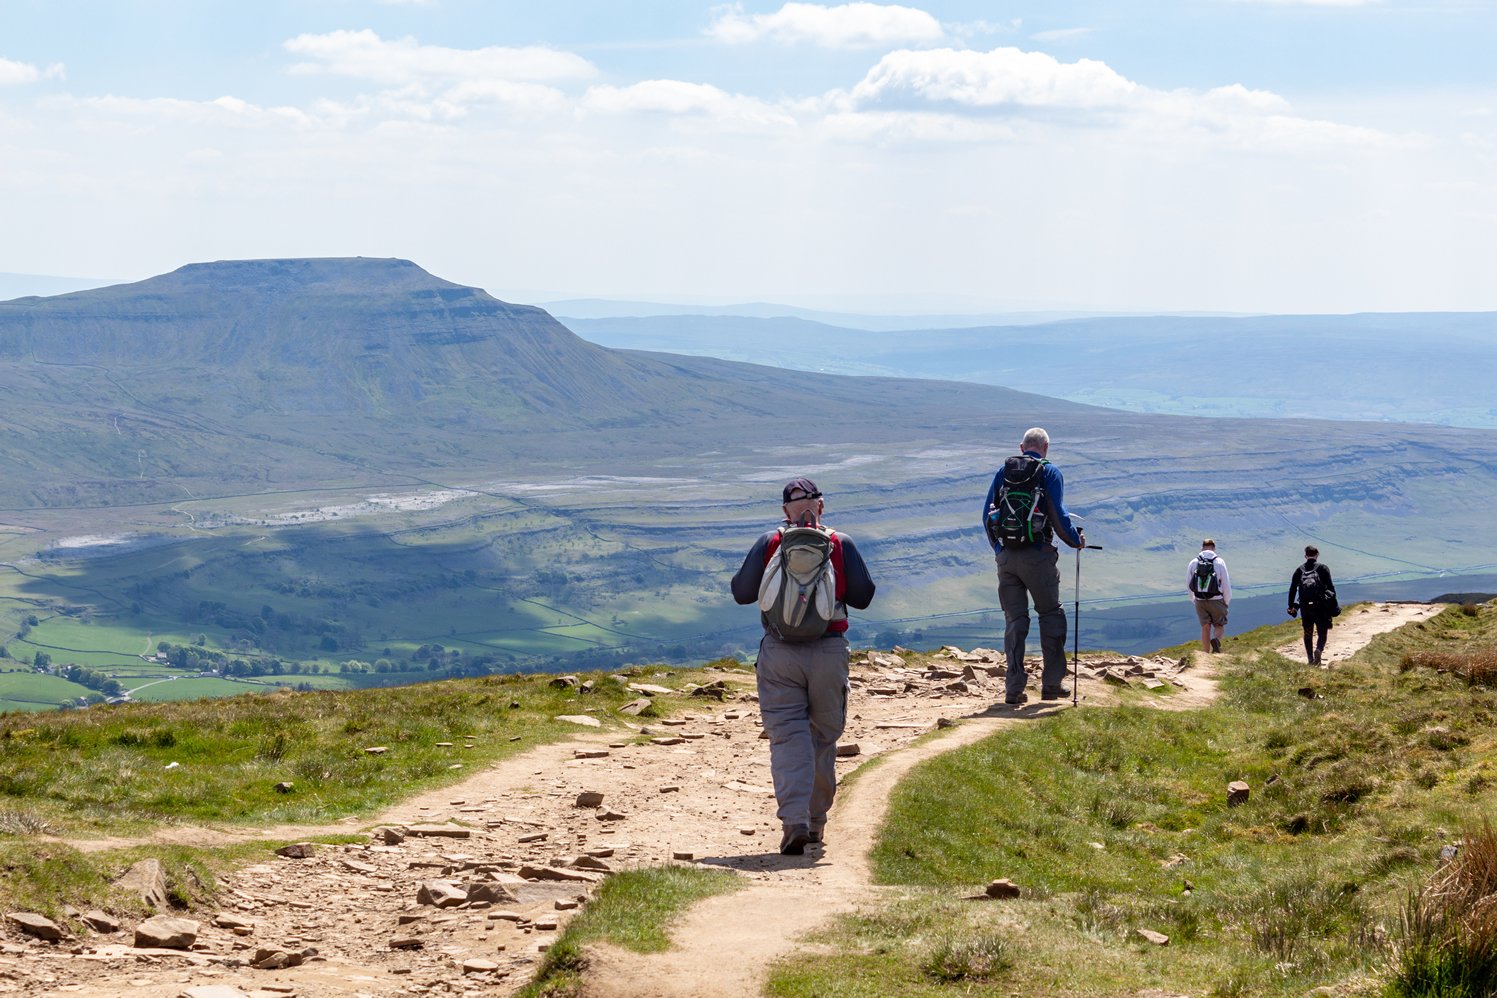 Image name walkers descending whernside view of ingleborough sunny yorkshire the 7 image from the post Stride Out in Yorkshire: Celebrate National Walking Day in Yorkshire.com.